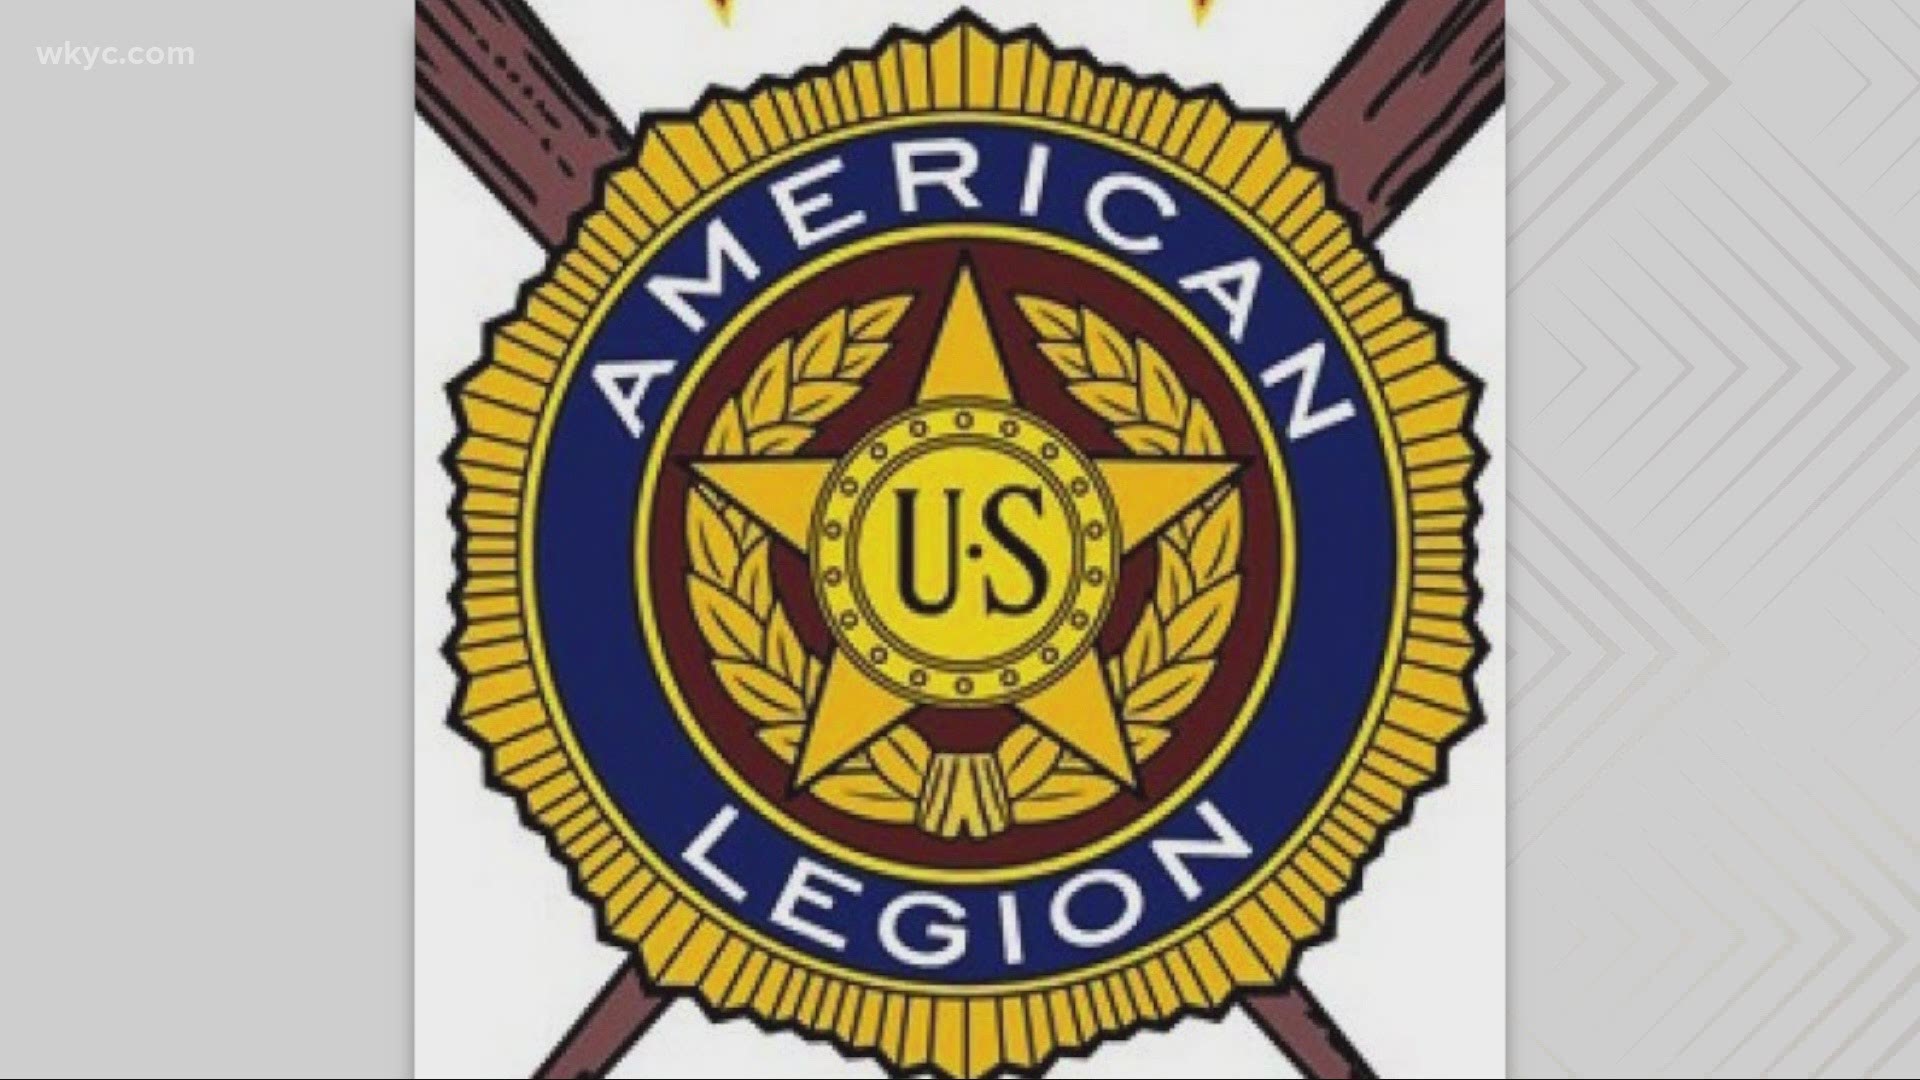 The resignation of Cindy Suchan comes as the Hudson Lee-Bishop American Legion Post 464 will hold a meeting later this month to discuss its future.